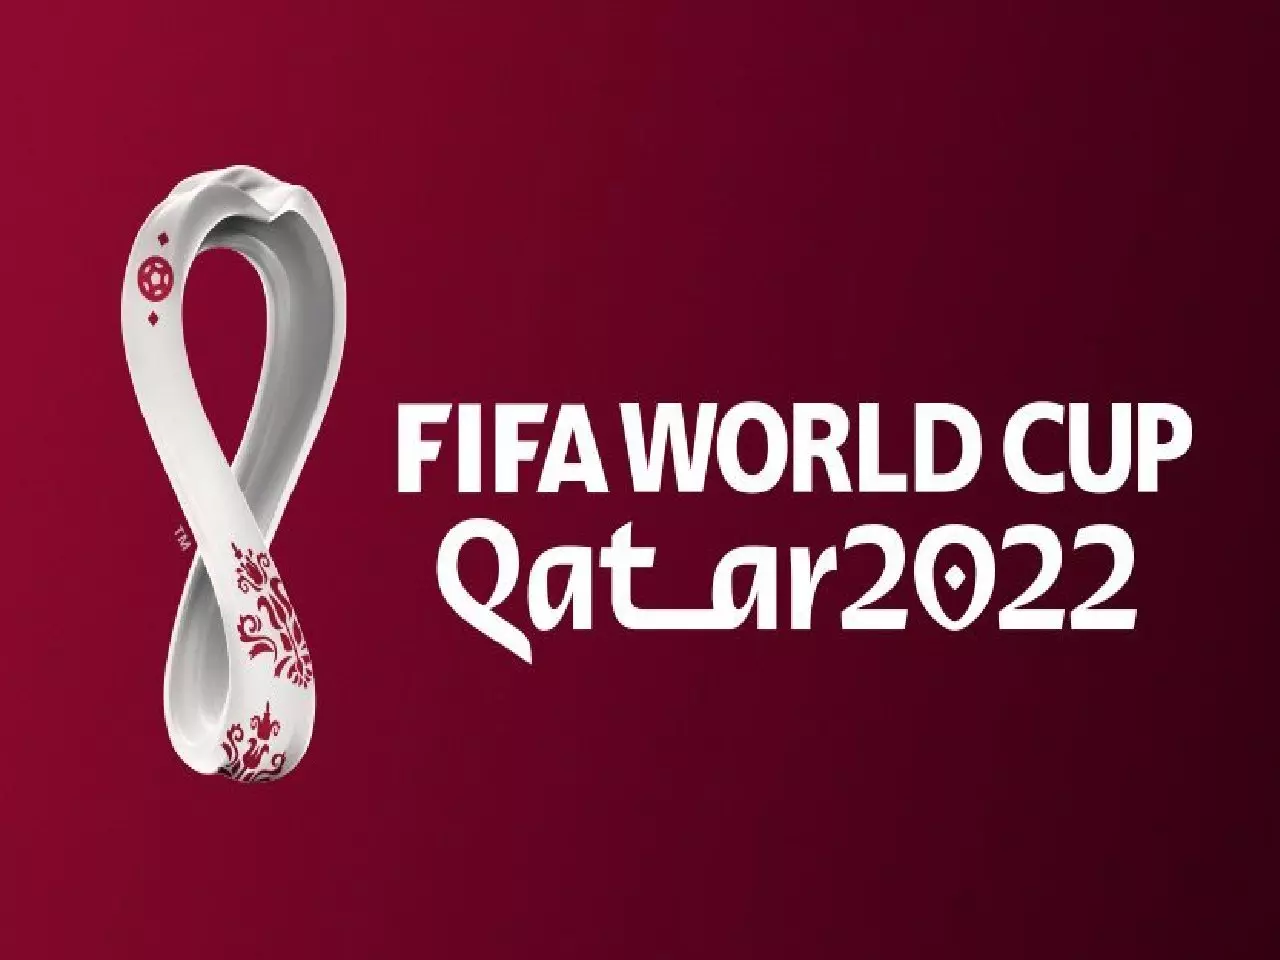 Swedish clubs sign Qatar protest, demand action from FIFA